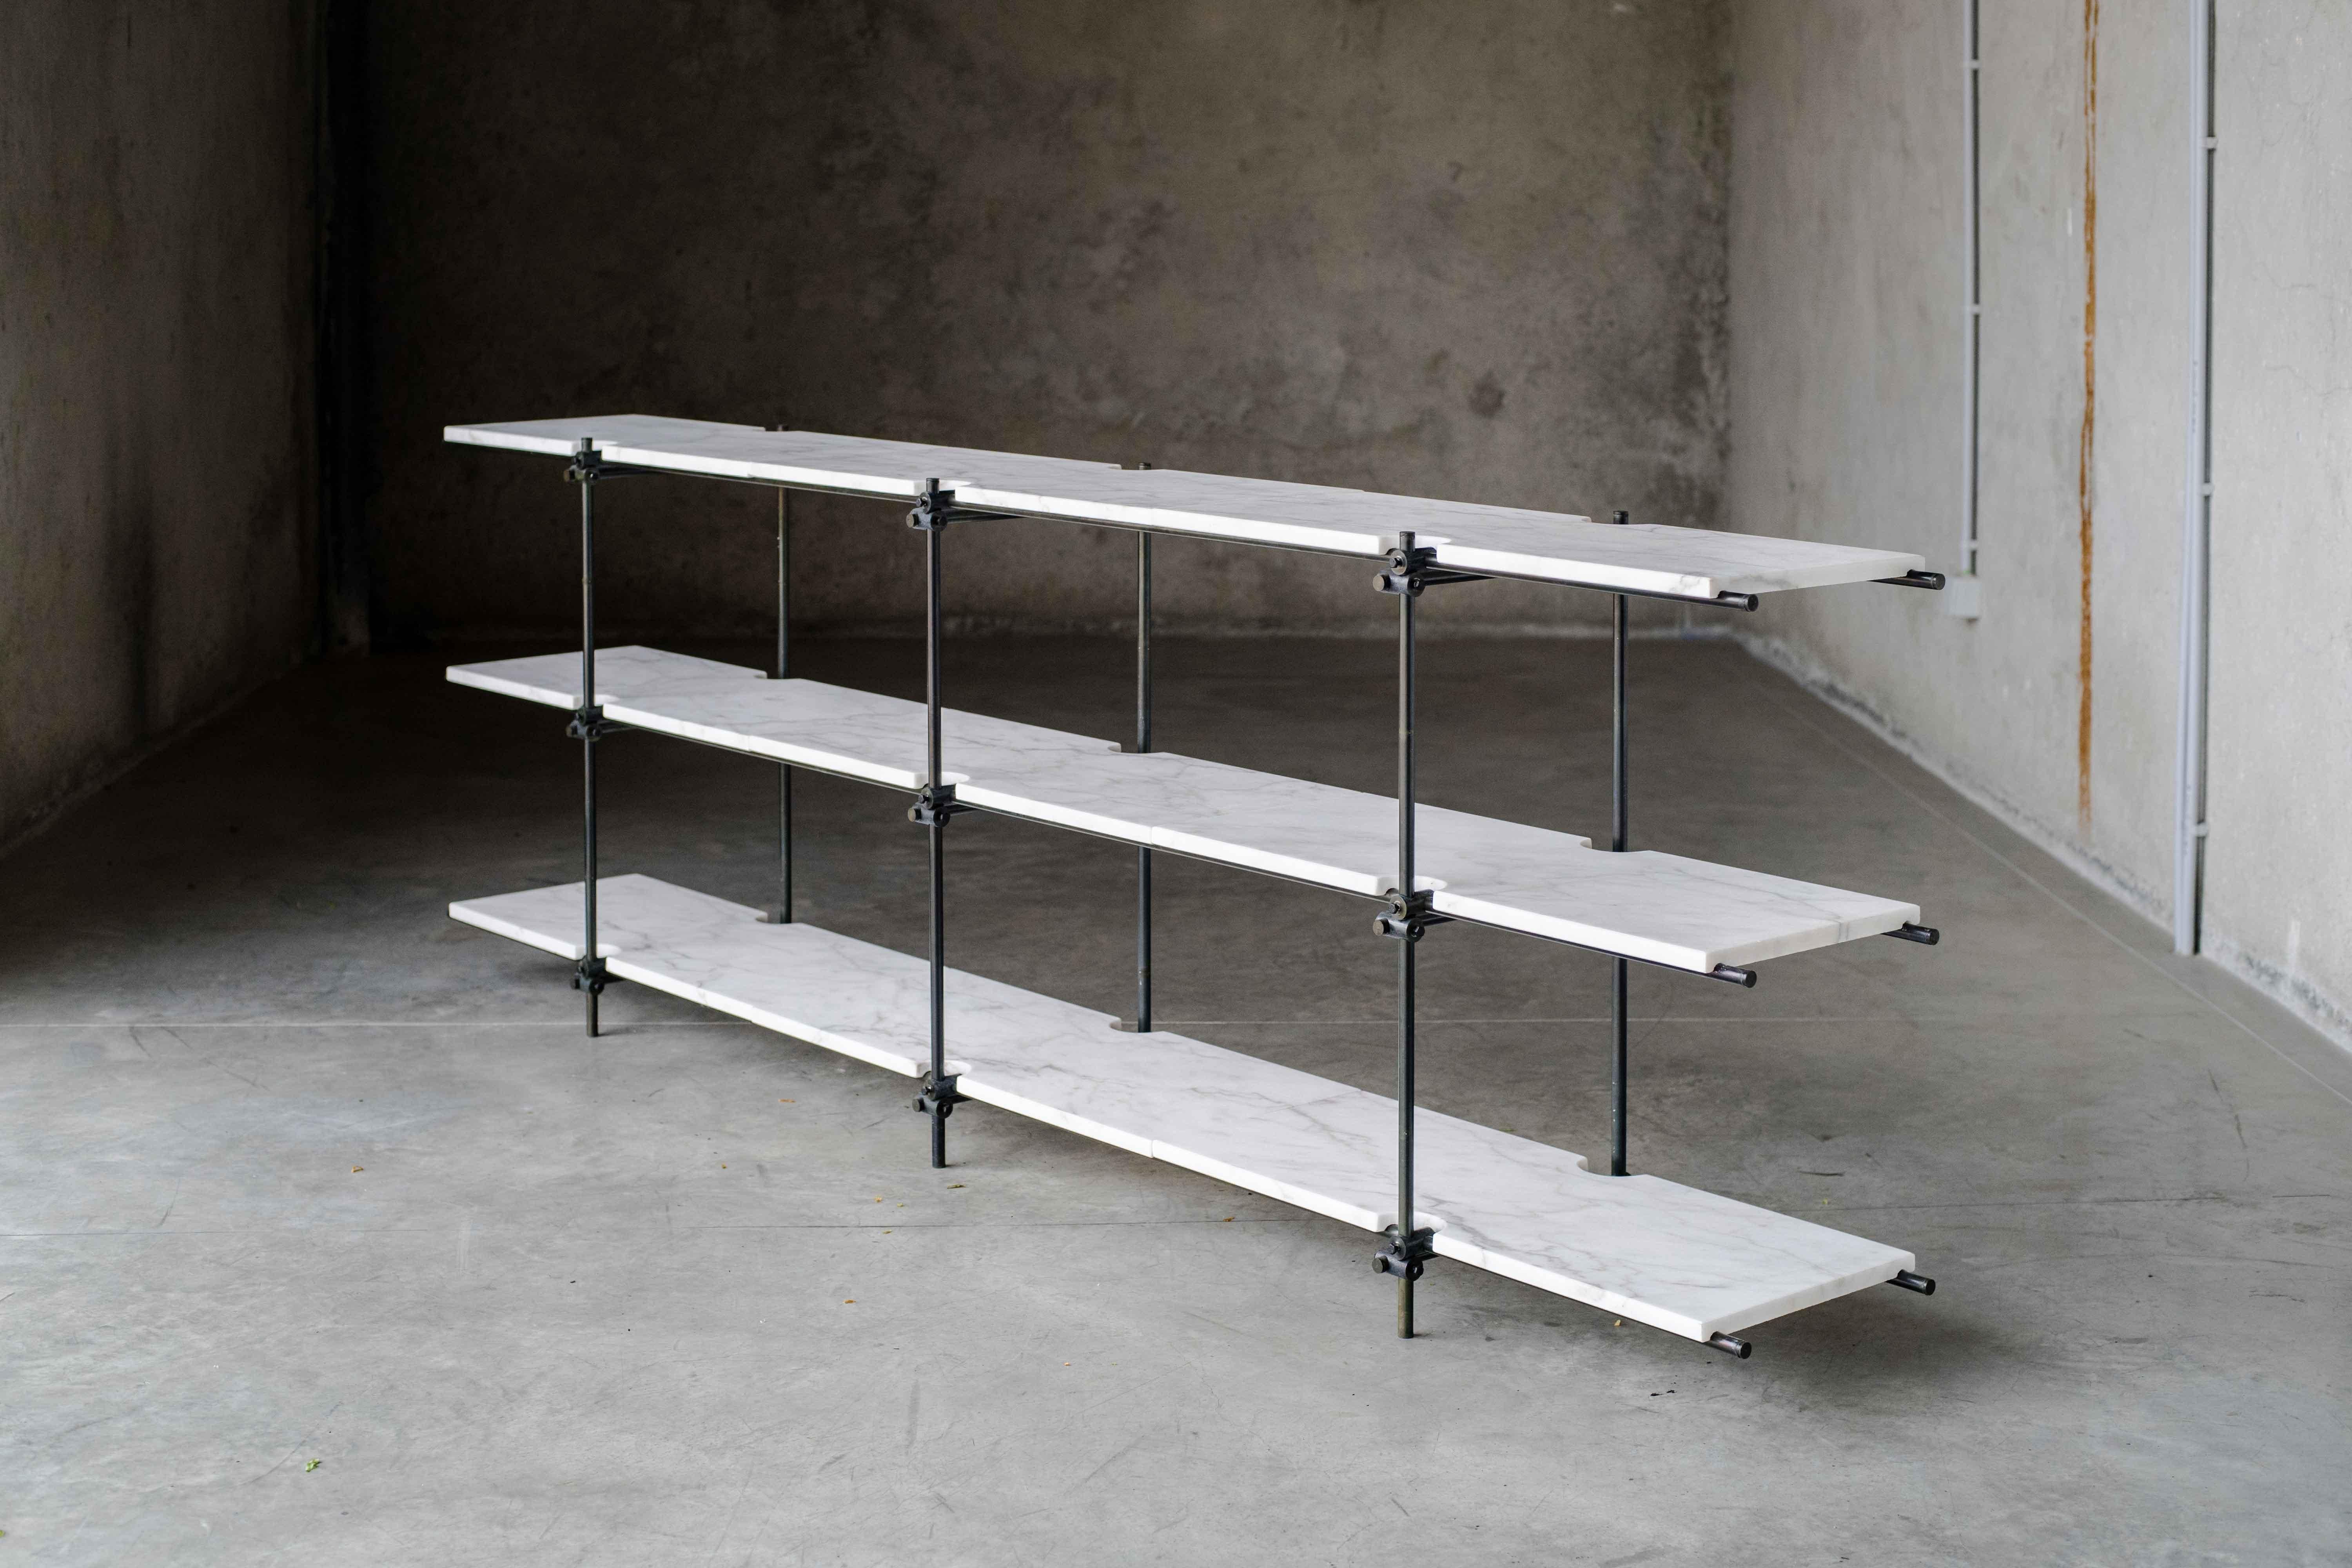 Knots and Tubes sideboard by MOB 
Limited editions of 15 + 1 prototype
Designer: Boris Gusic and Lucio Crignola (Switzerland)
Dimensions: h 82 x d 32 x w 245 cm
Material: Carbon steel tubes and connectors, Estremoz white marble

'Knots and